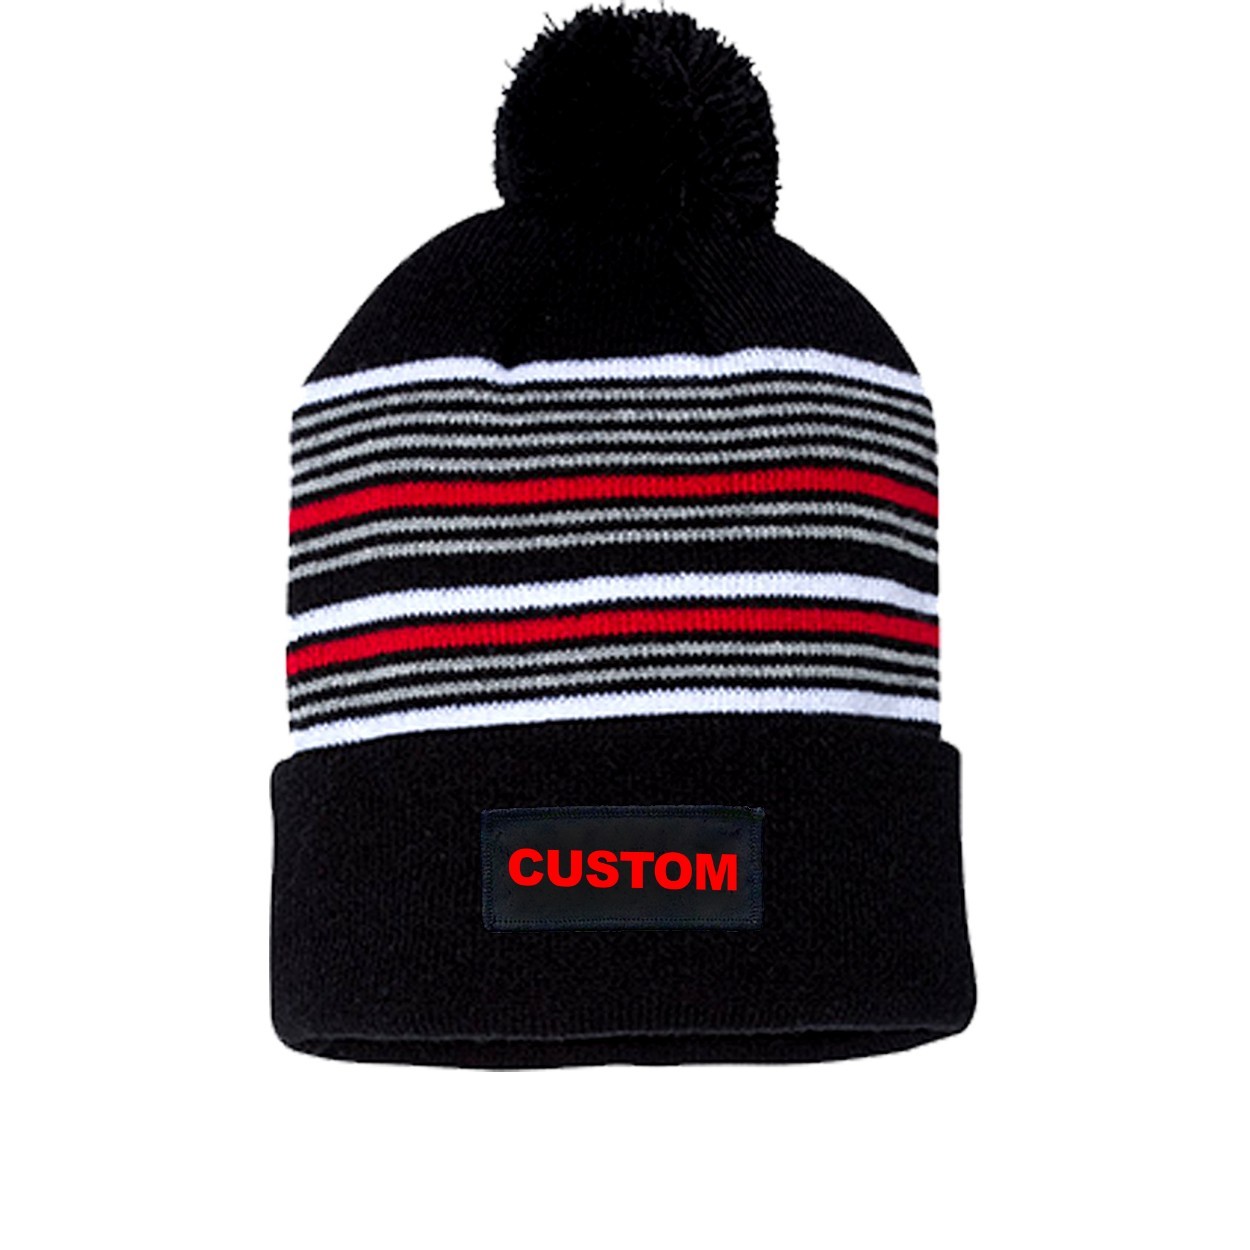 Custom Life Brand Logo Night Out Woven Patch Roll Up Pom Knit Beanie Black/ White/ Grey/ Red Beanie (Red Logo)